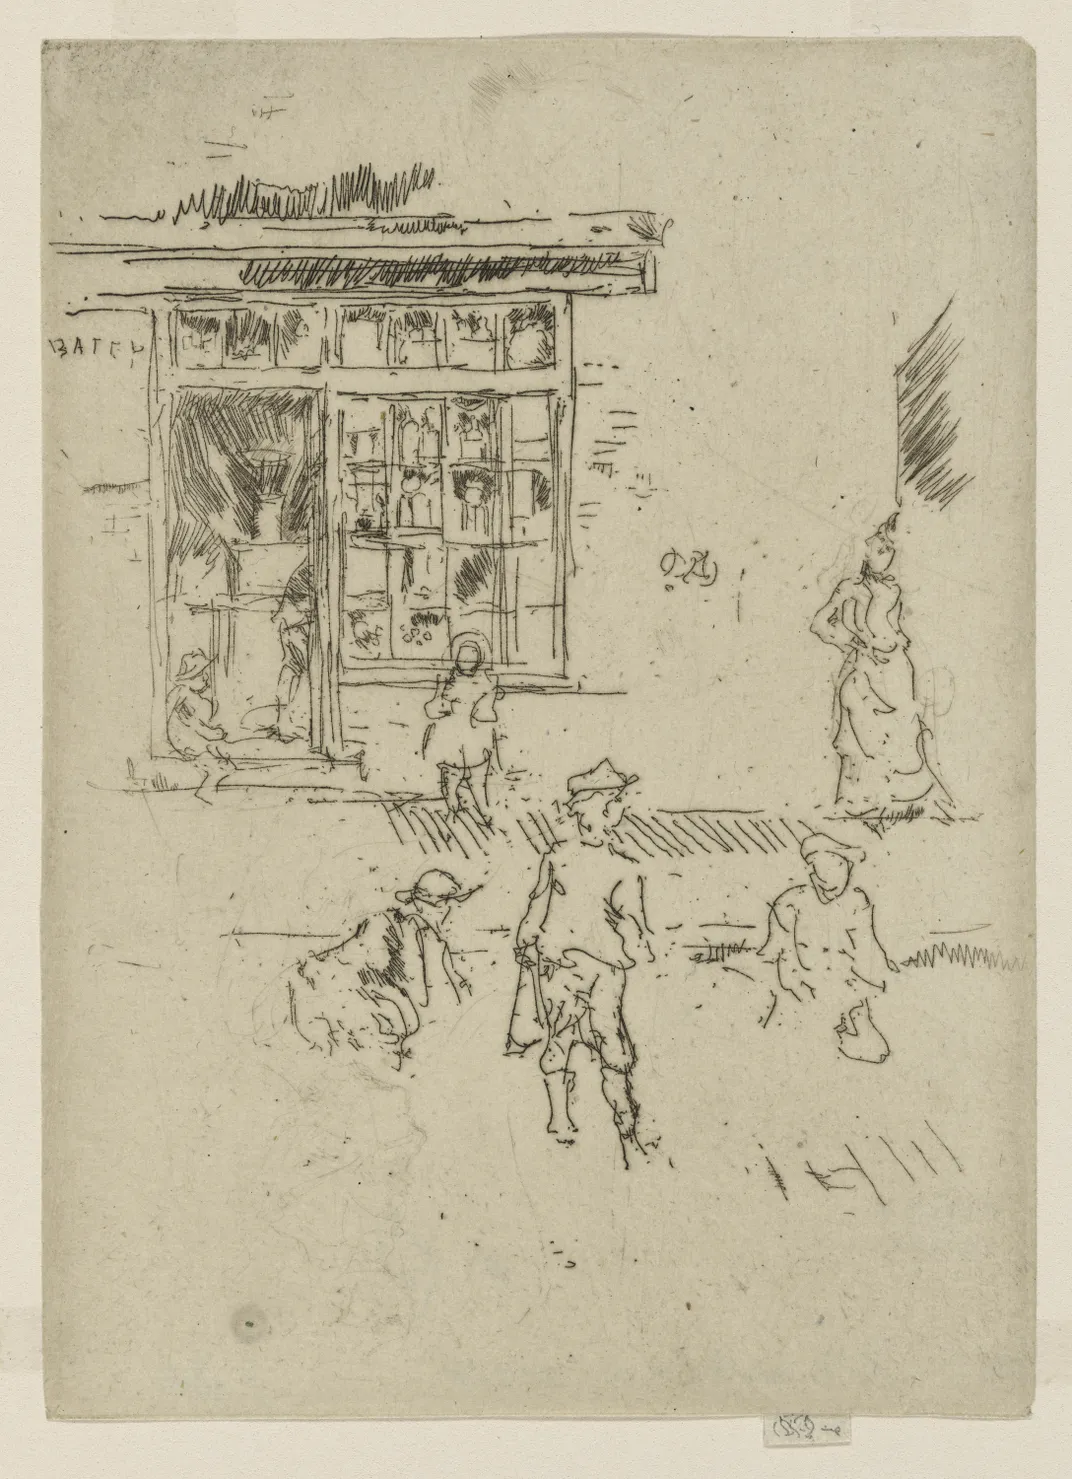 Marbles, James McNeill Whistler, c. 1886-1888